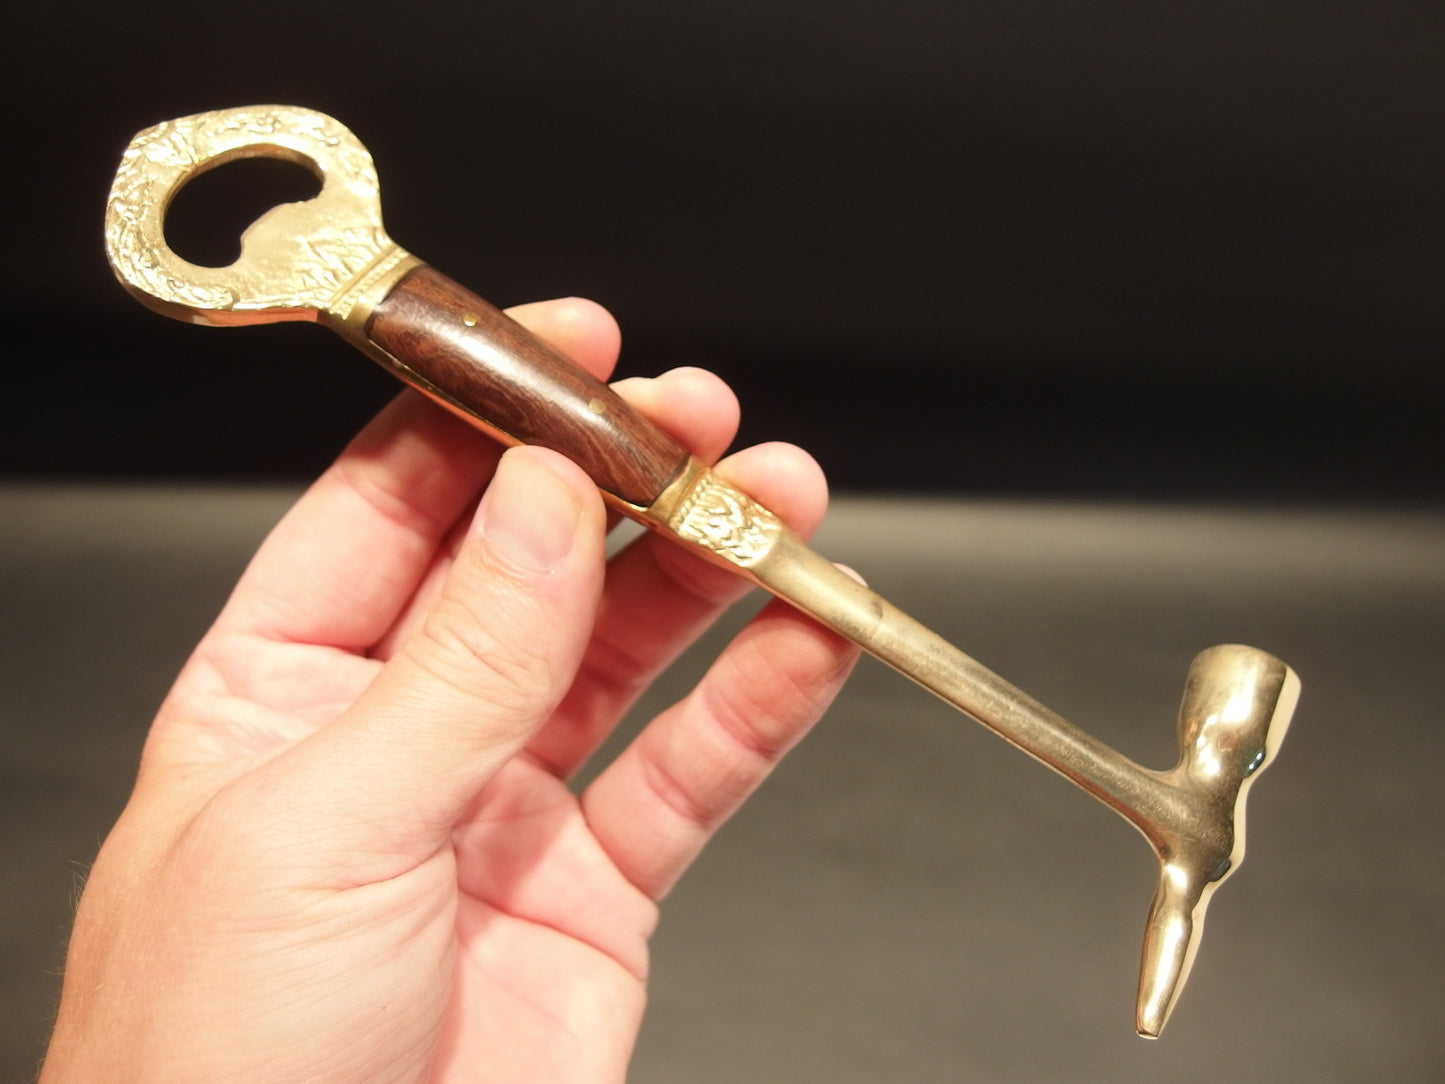 Antique Vintage Style Bottle Cap Opener w Ice Breaking Hammer & Pick - Early Home Decor